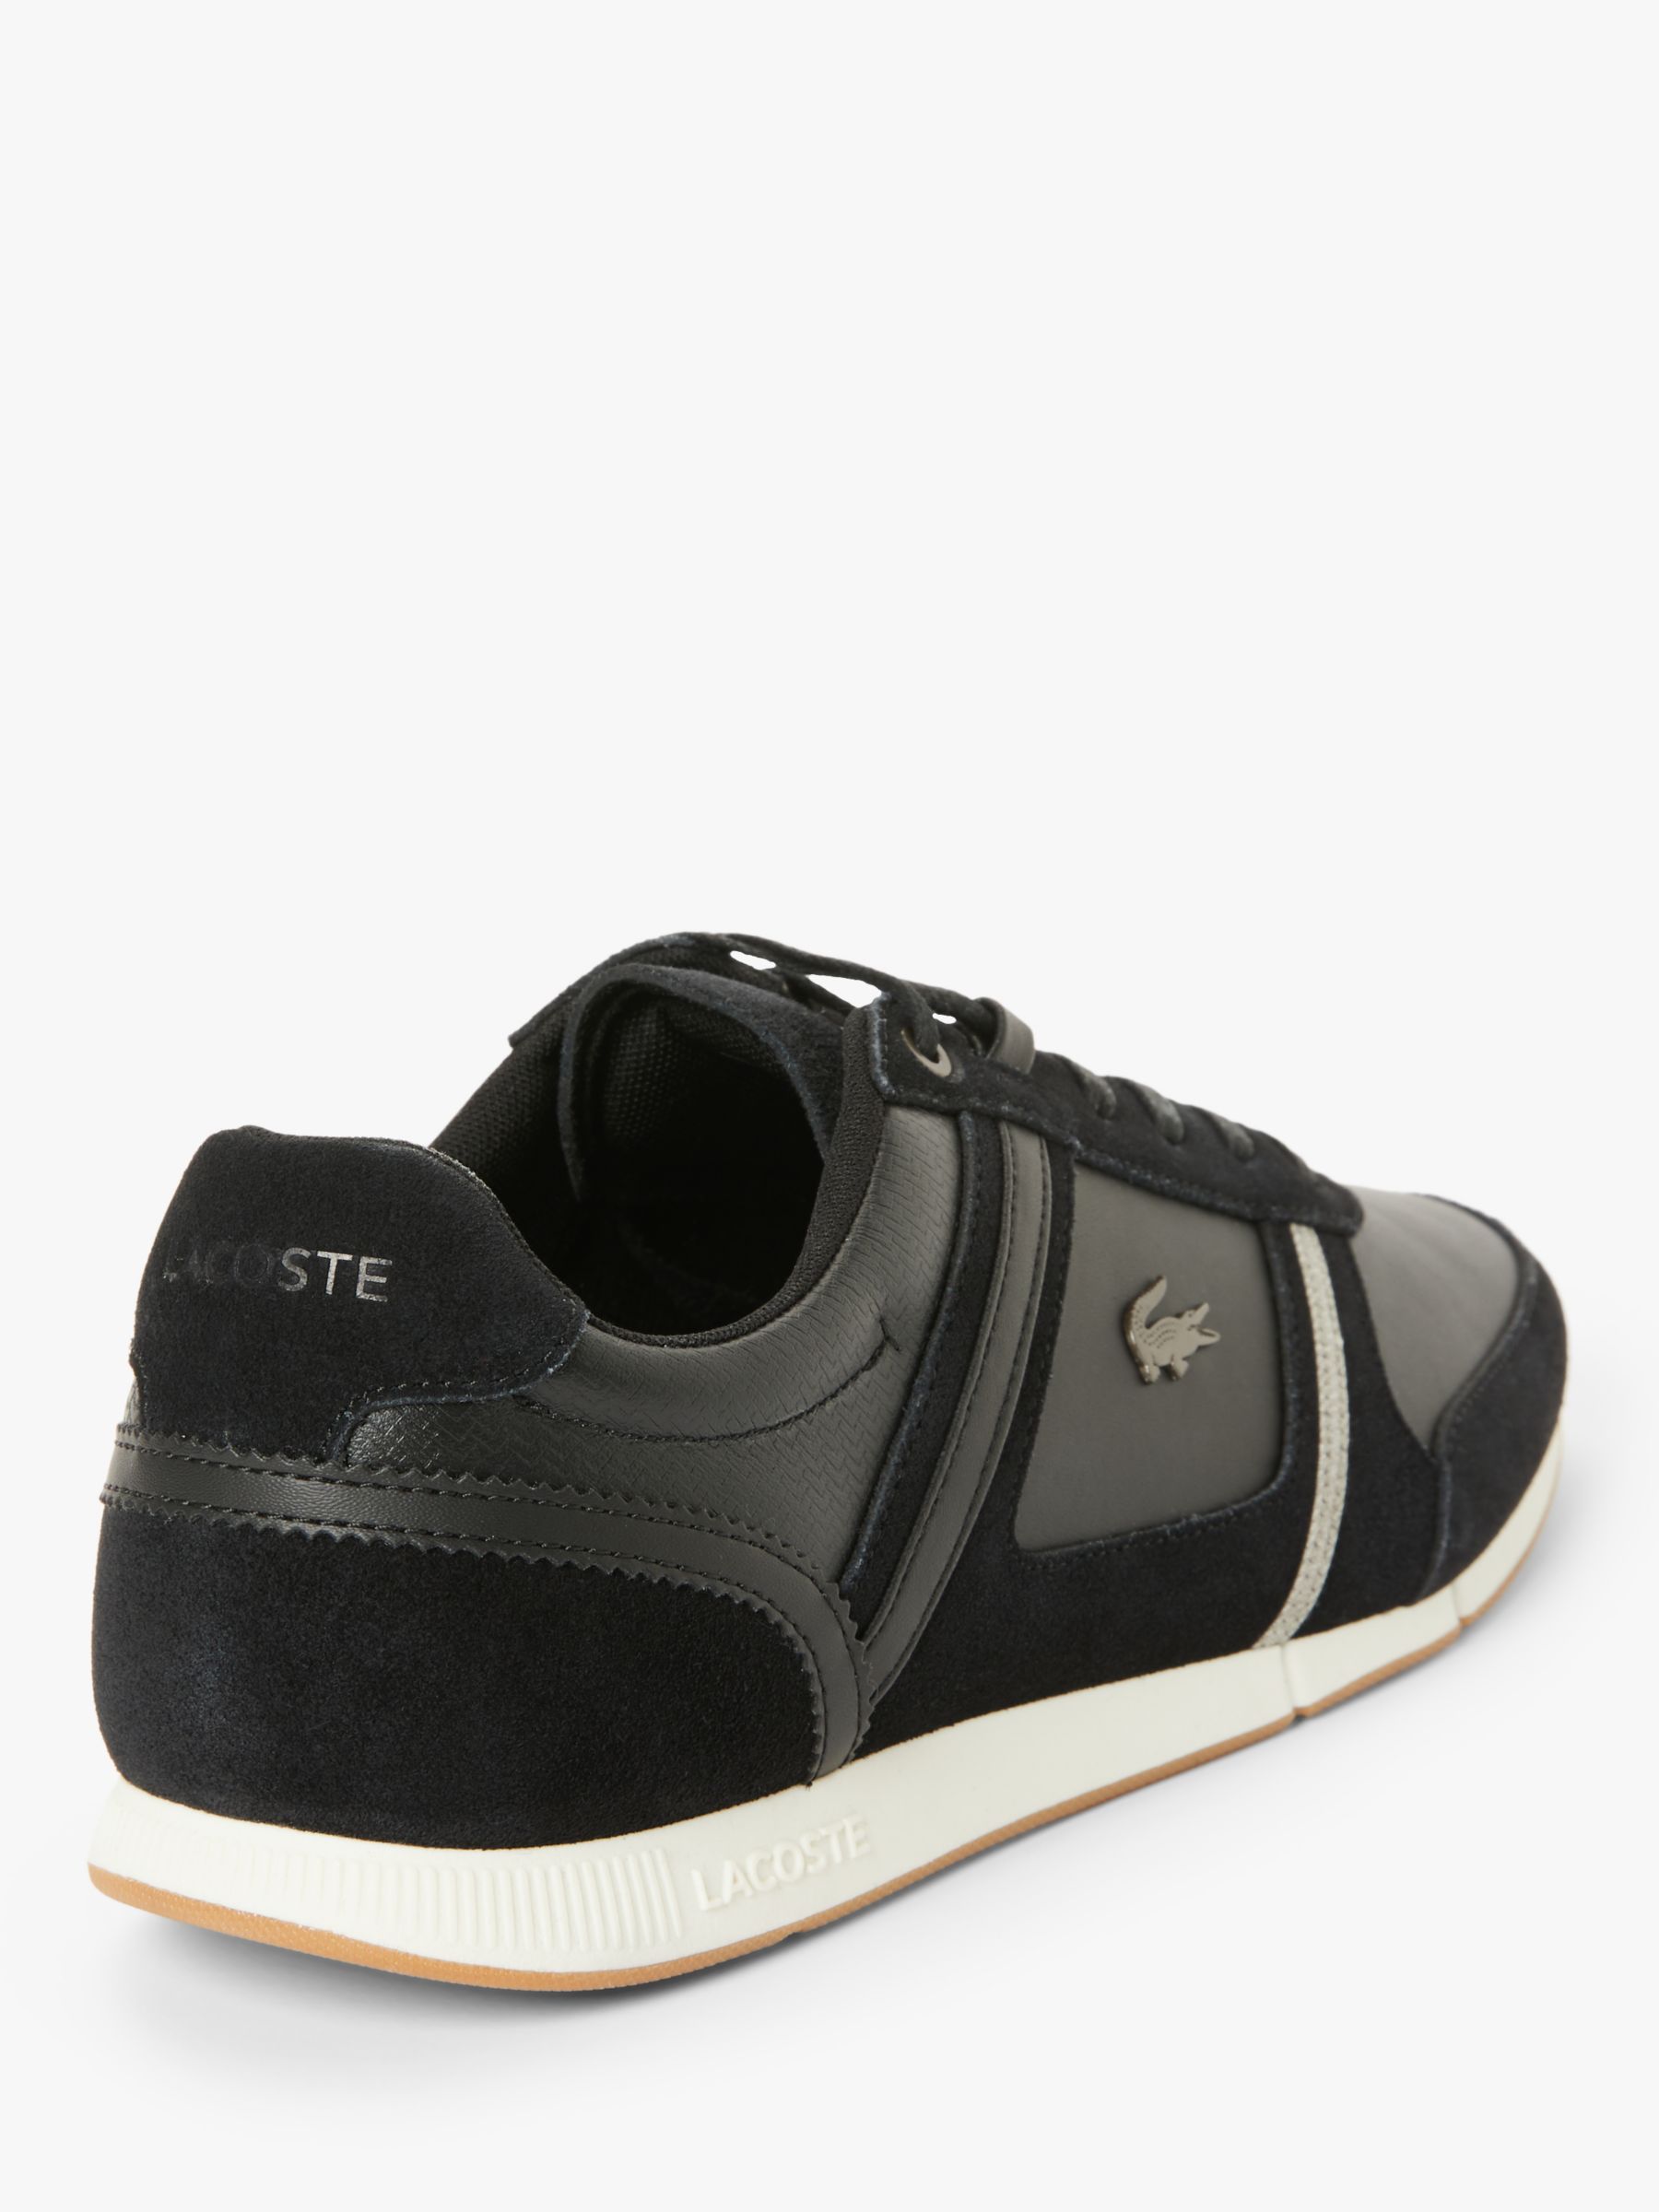 Lacoste Menerva Suede Leather Trainers 